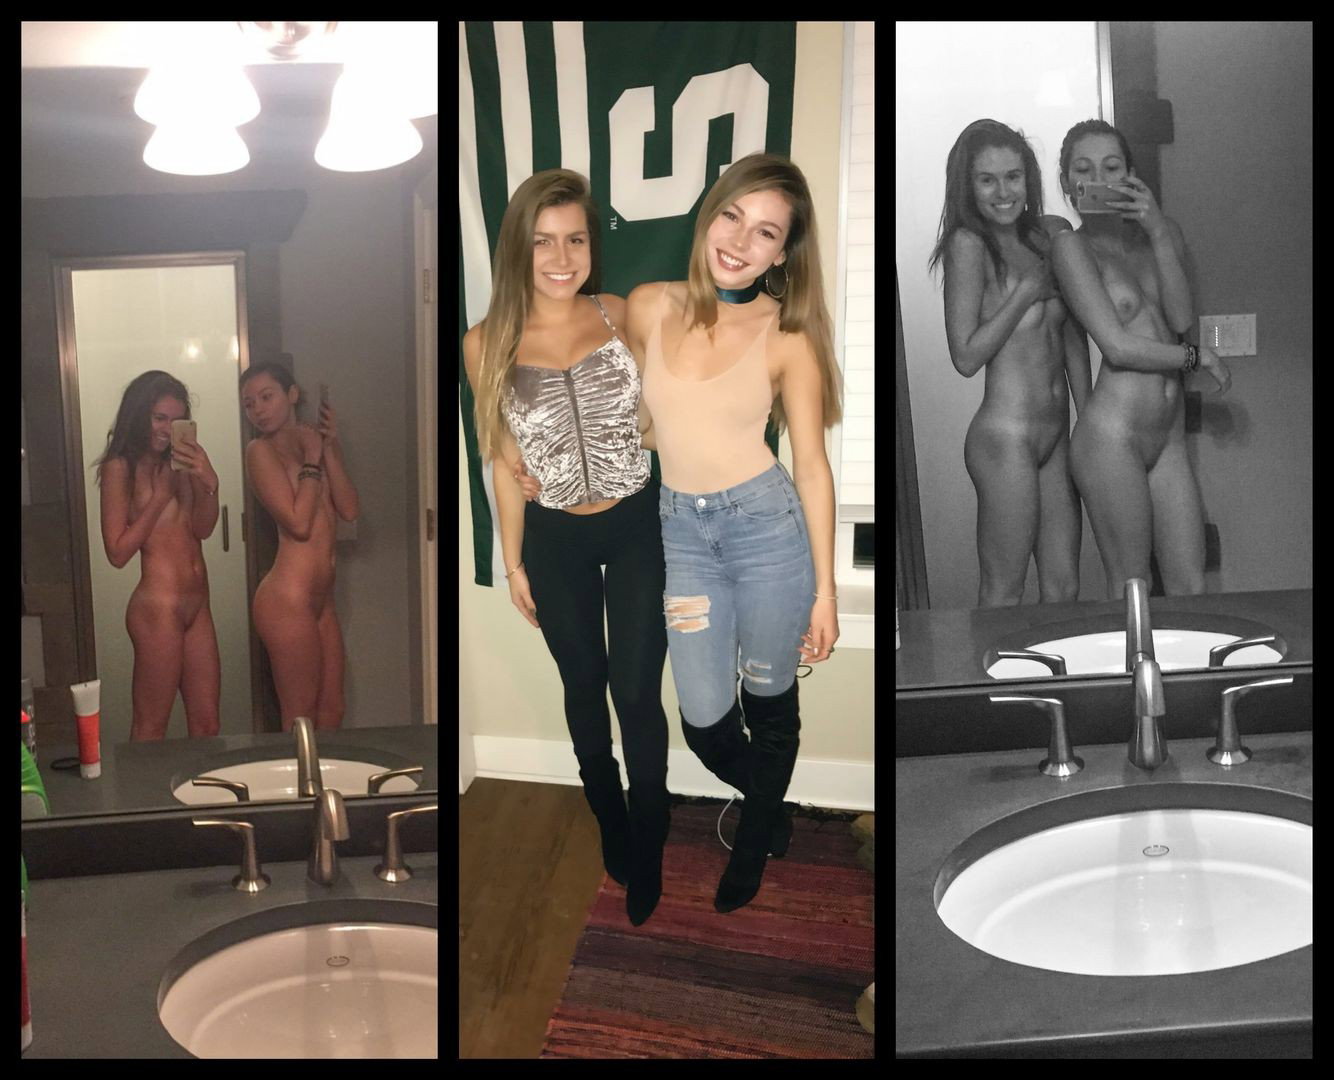 Photo by Caffiend with the username @Caffiend,  November 3, 2020 at 7:14 PM. The post is about the topic On and Off/Before and After and the text says '#OnAndOff #BeforeAndAfter #CollegeGirls 
College Girls always good for showing some skin'